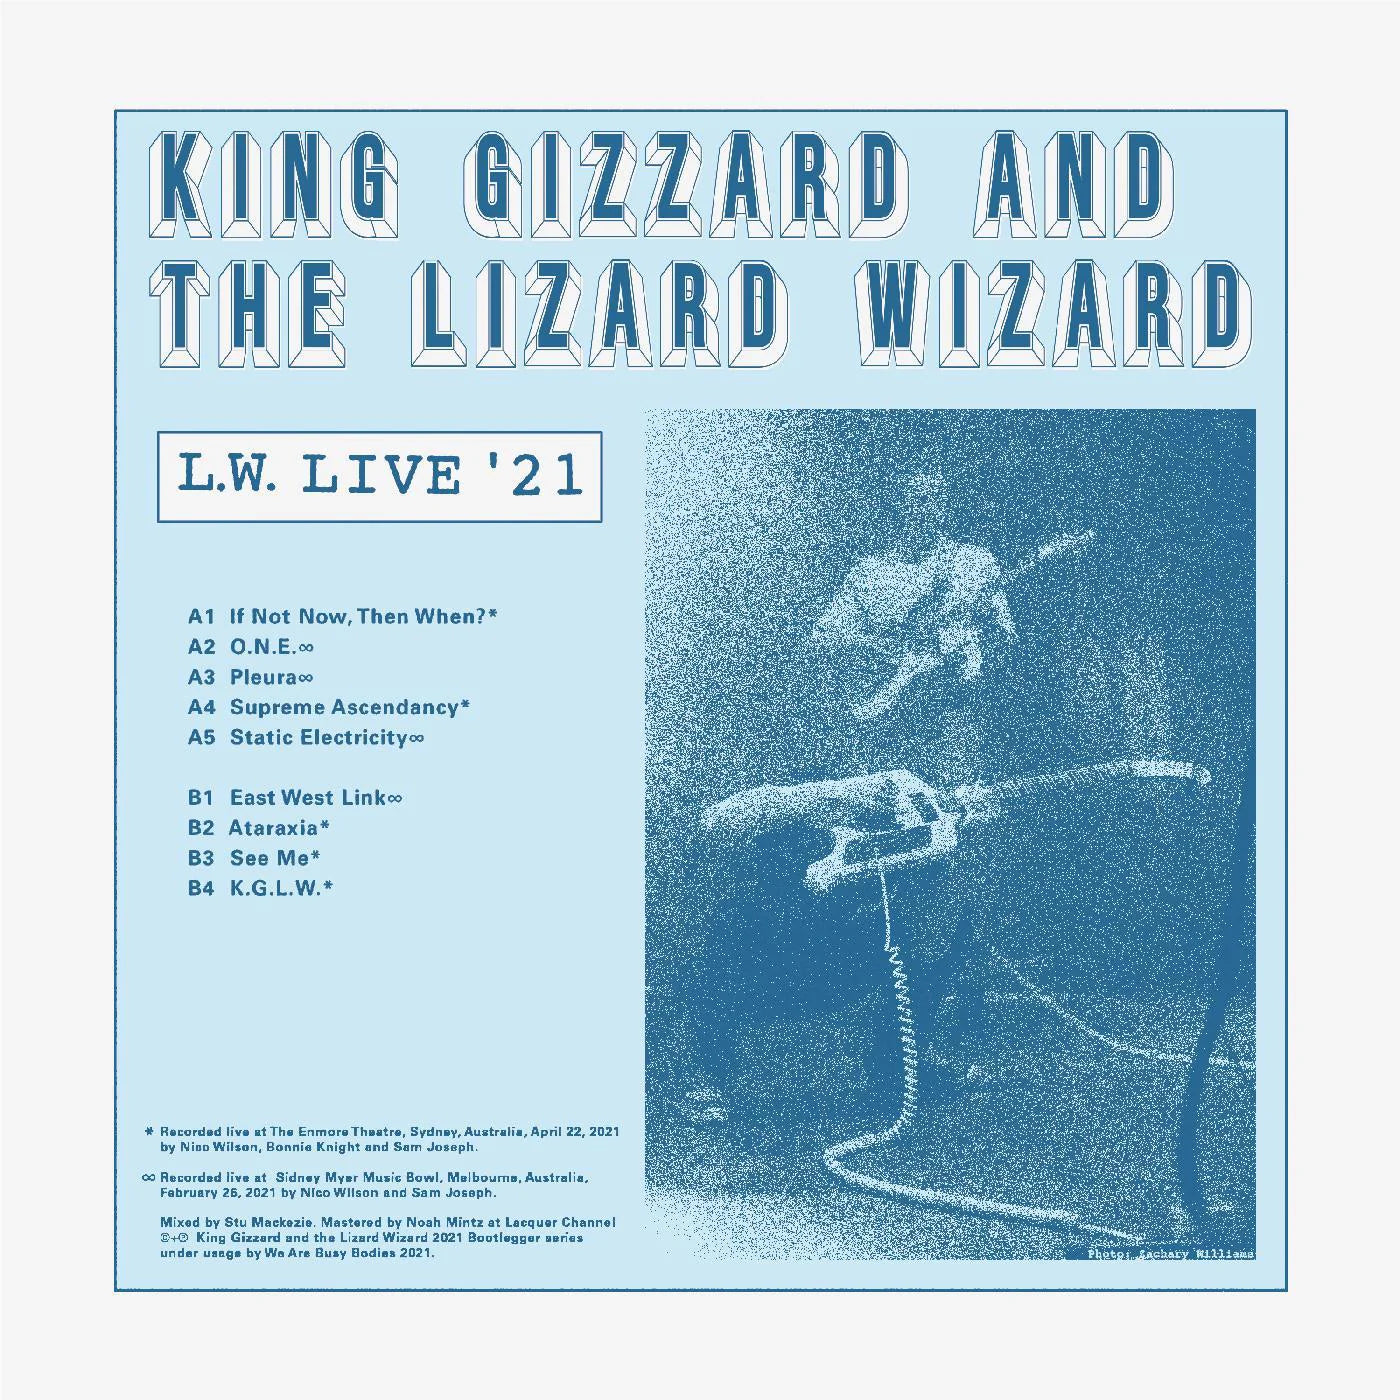 King Gizzard & the Lizard Wizard - L.W. Live in Australia | Buy the Vinyl LP from Flying Nun Records